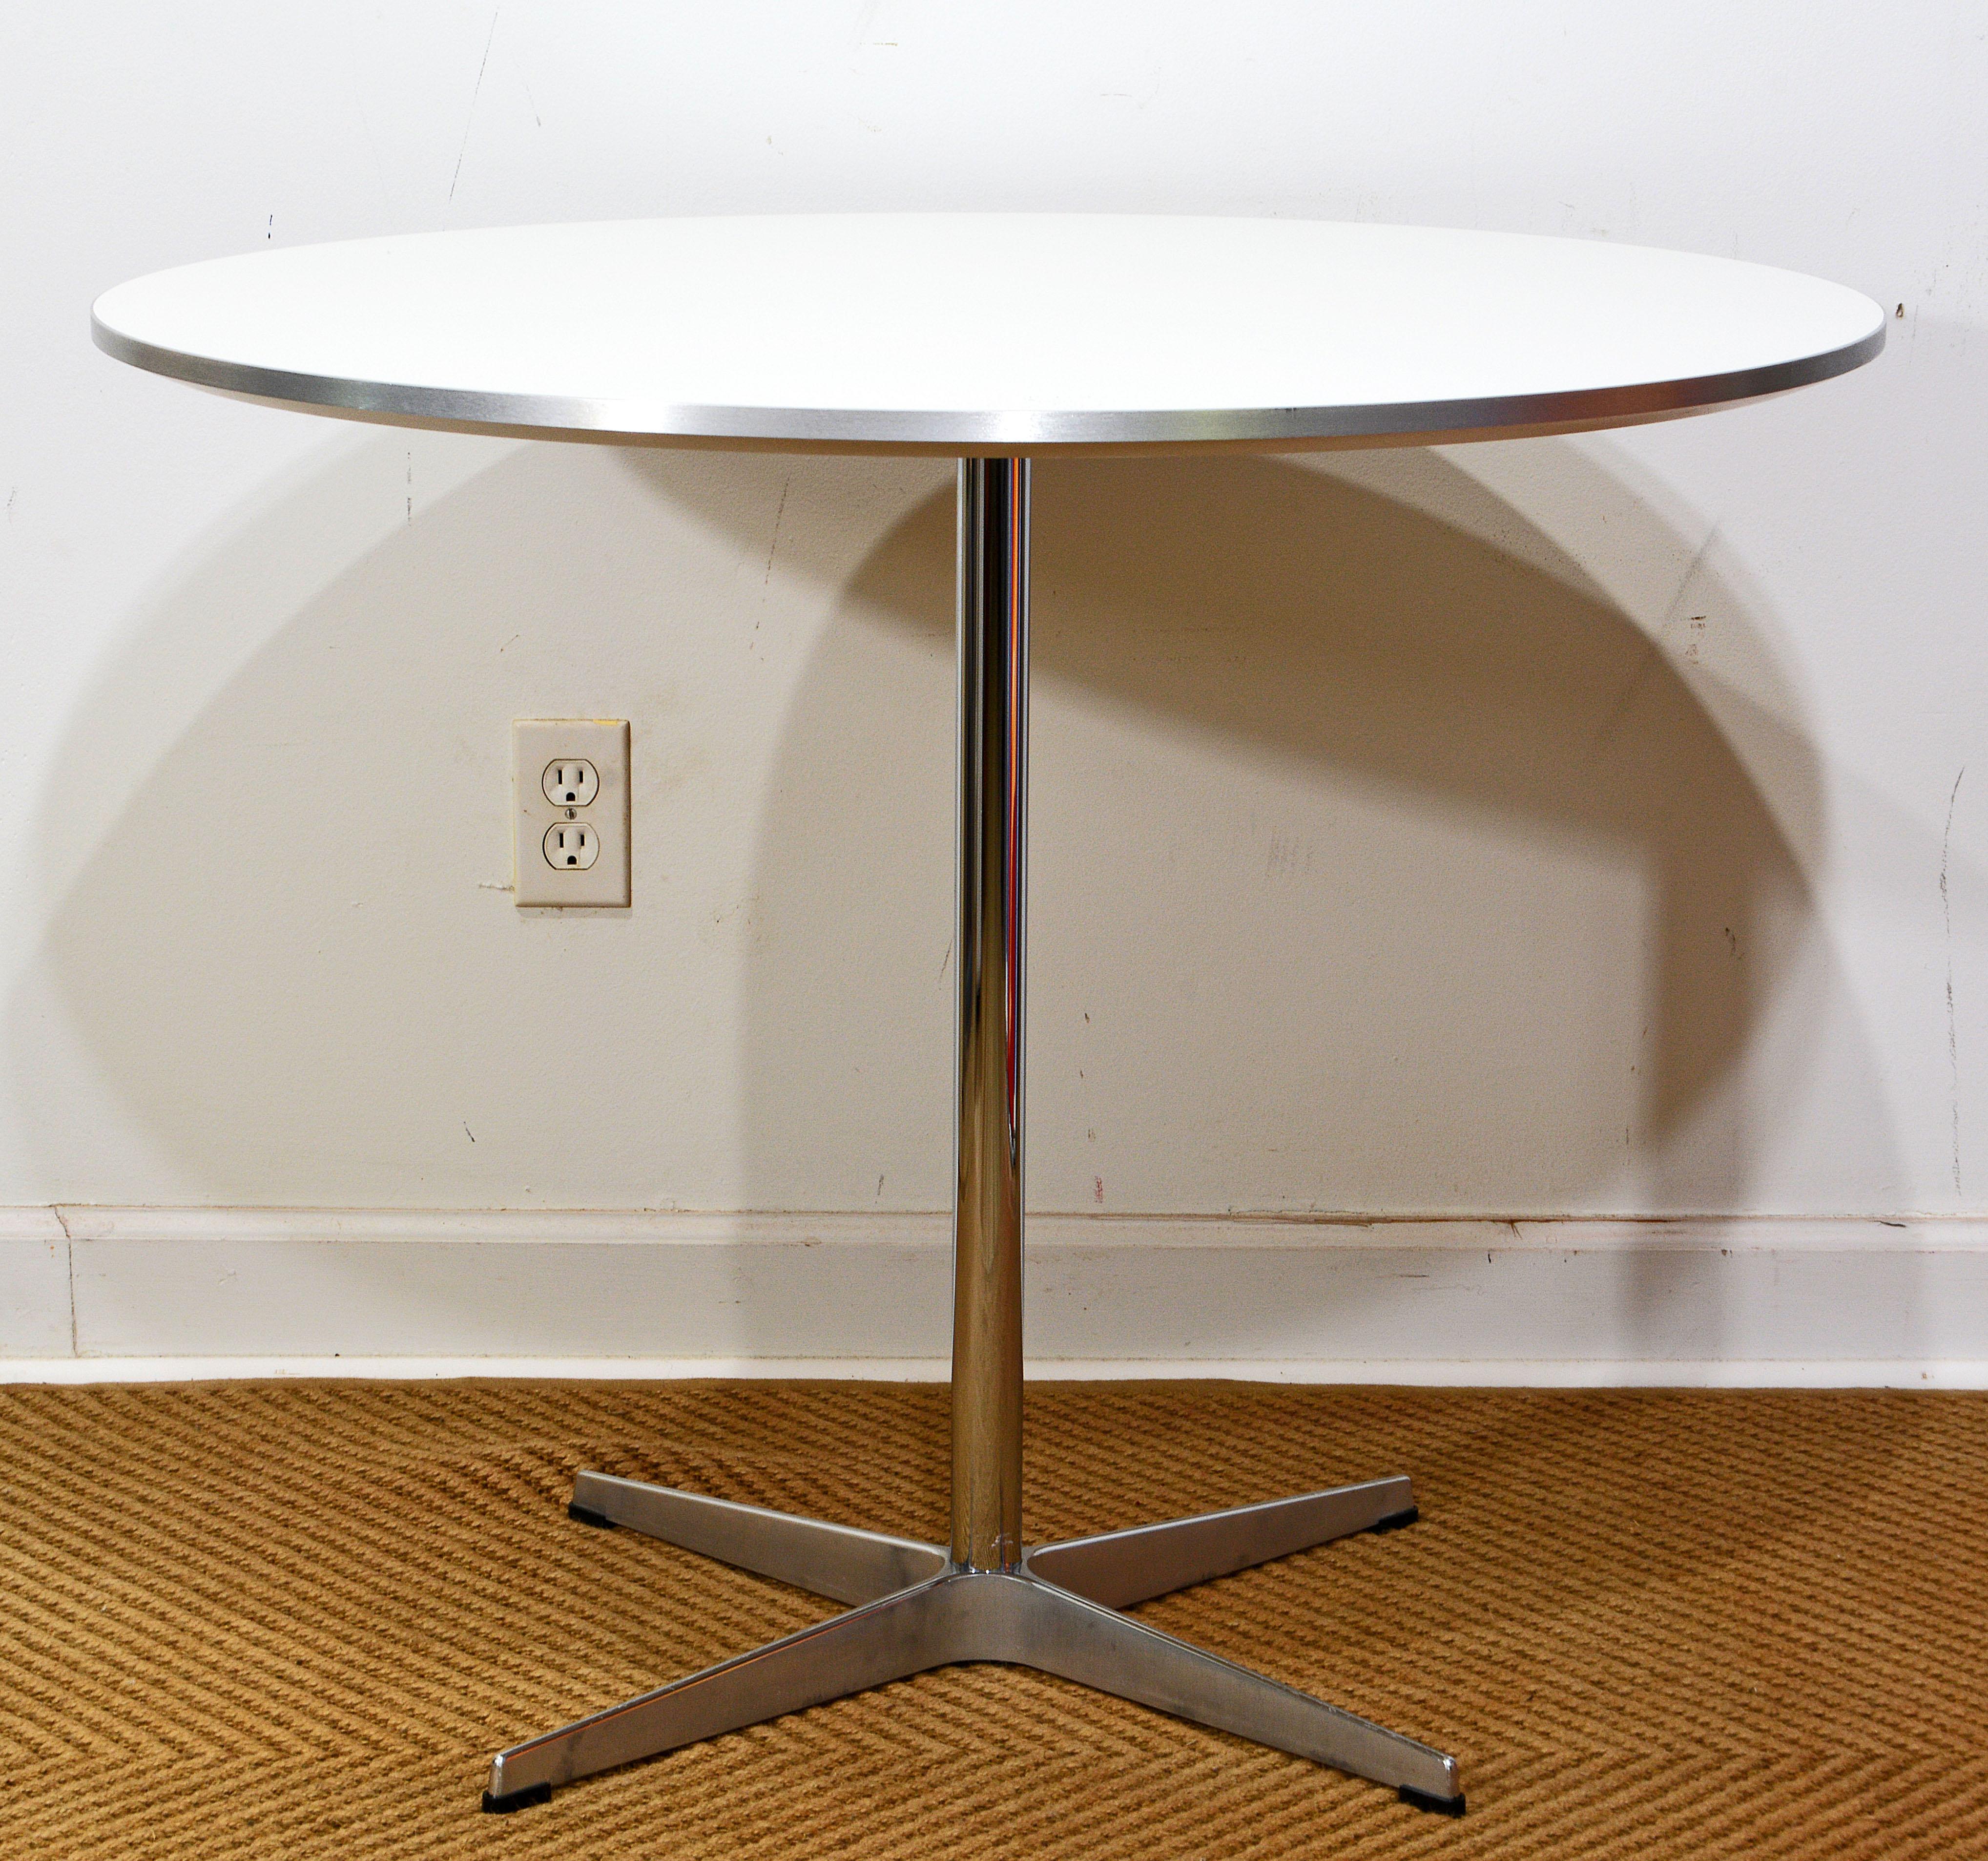 Iconic circular cafe or breakfast table designed by Arne Jacobsen and produced by Fritz Hansen in 2010. The table has white chamfered laminate top with brushed aluminum edge, and polished aluminum four feet console. Marked with original brand and